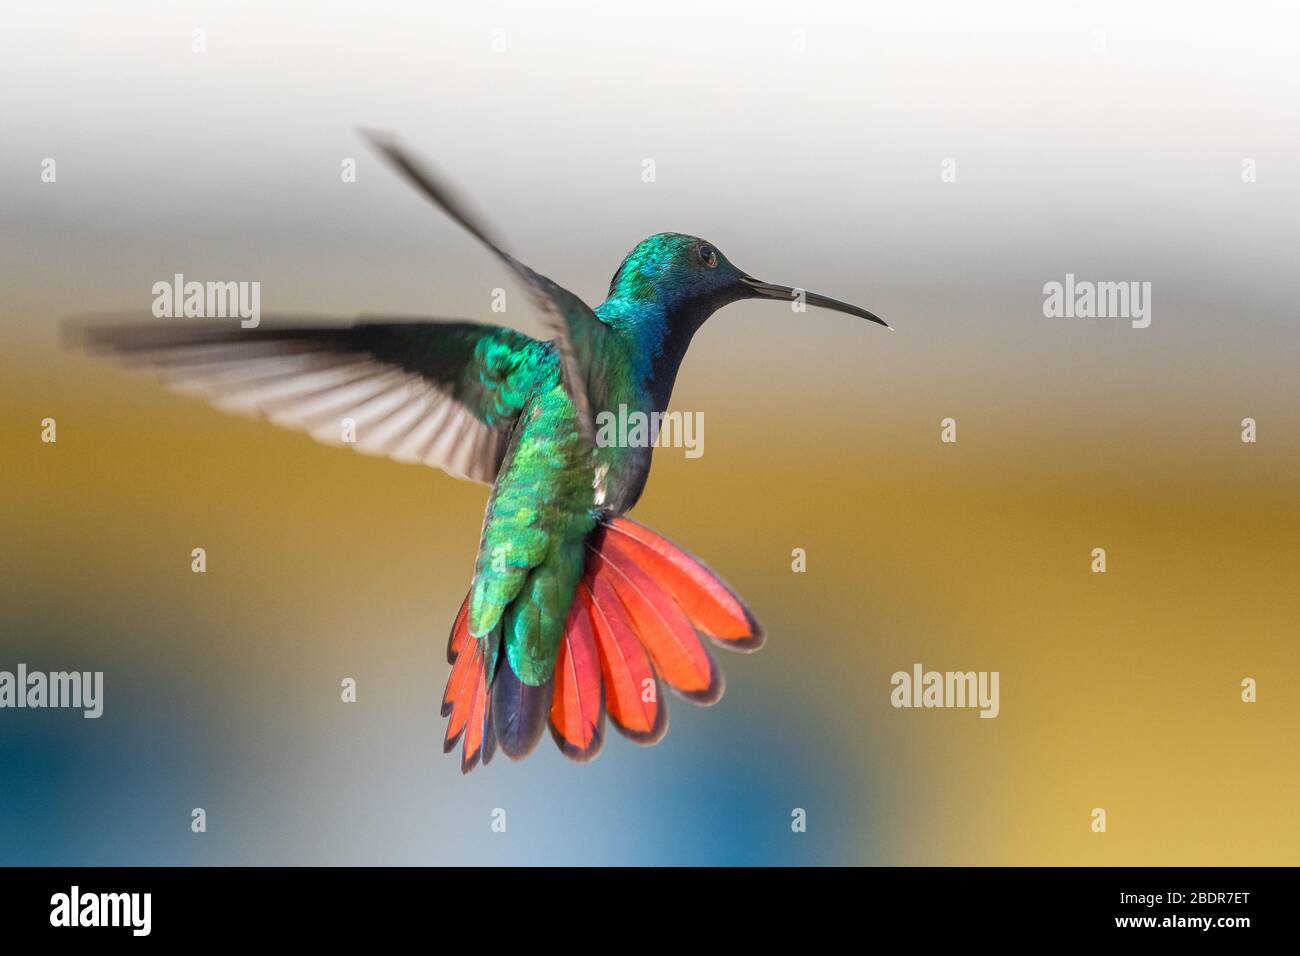 A Black-throated Mango hummingbird hovering in the air with a blurred background. Stock Photo